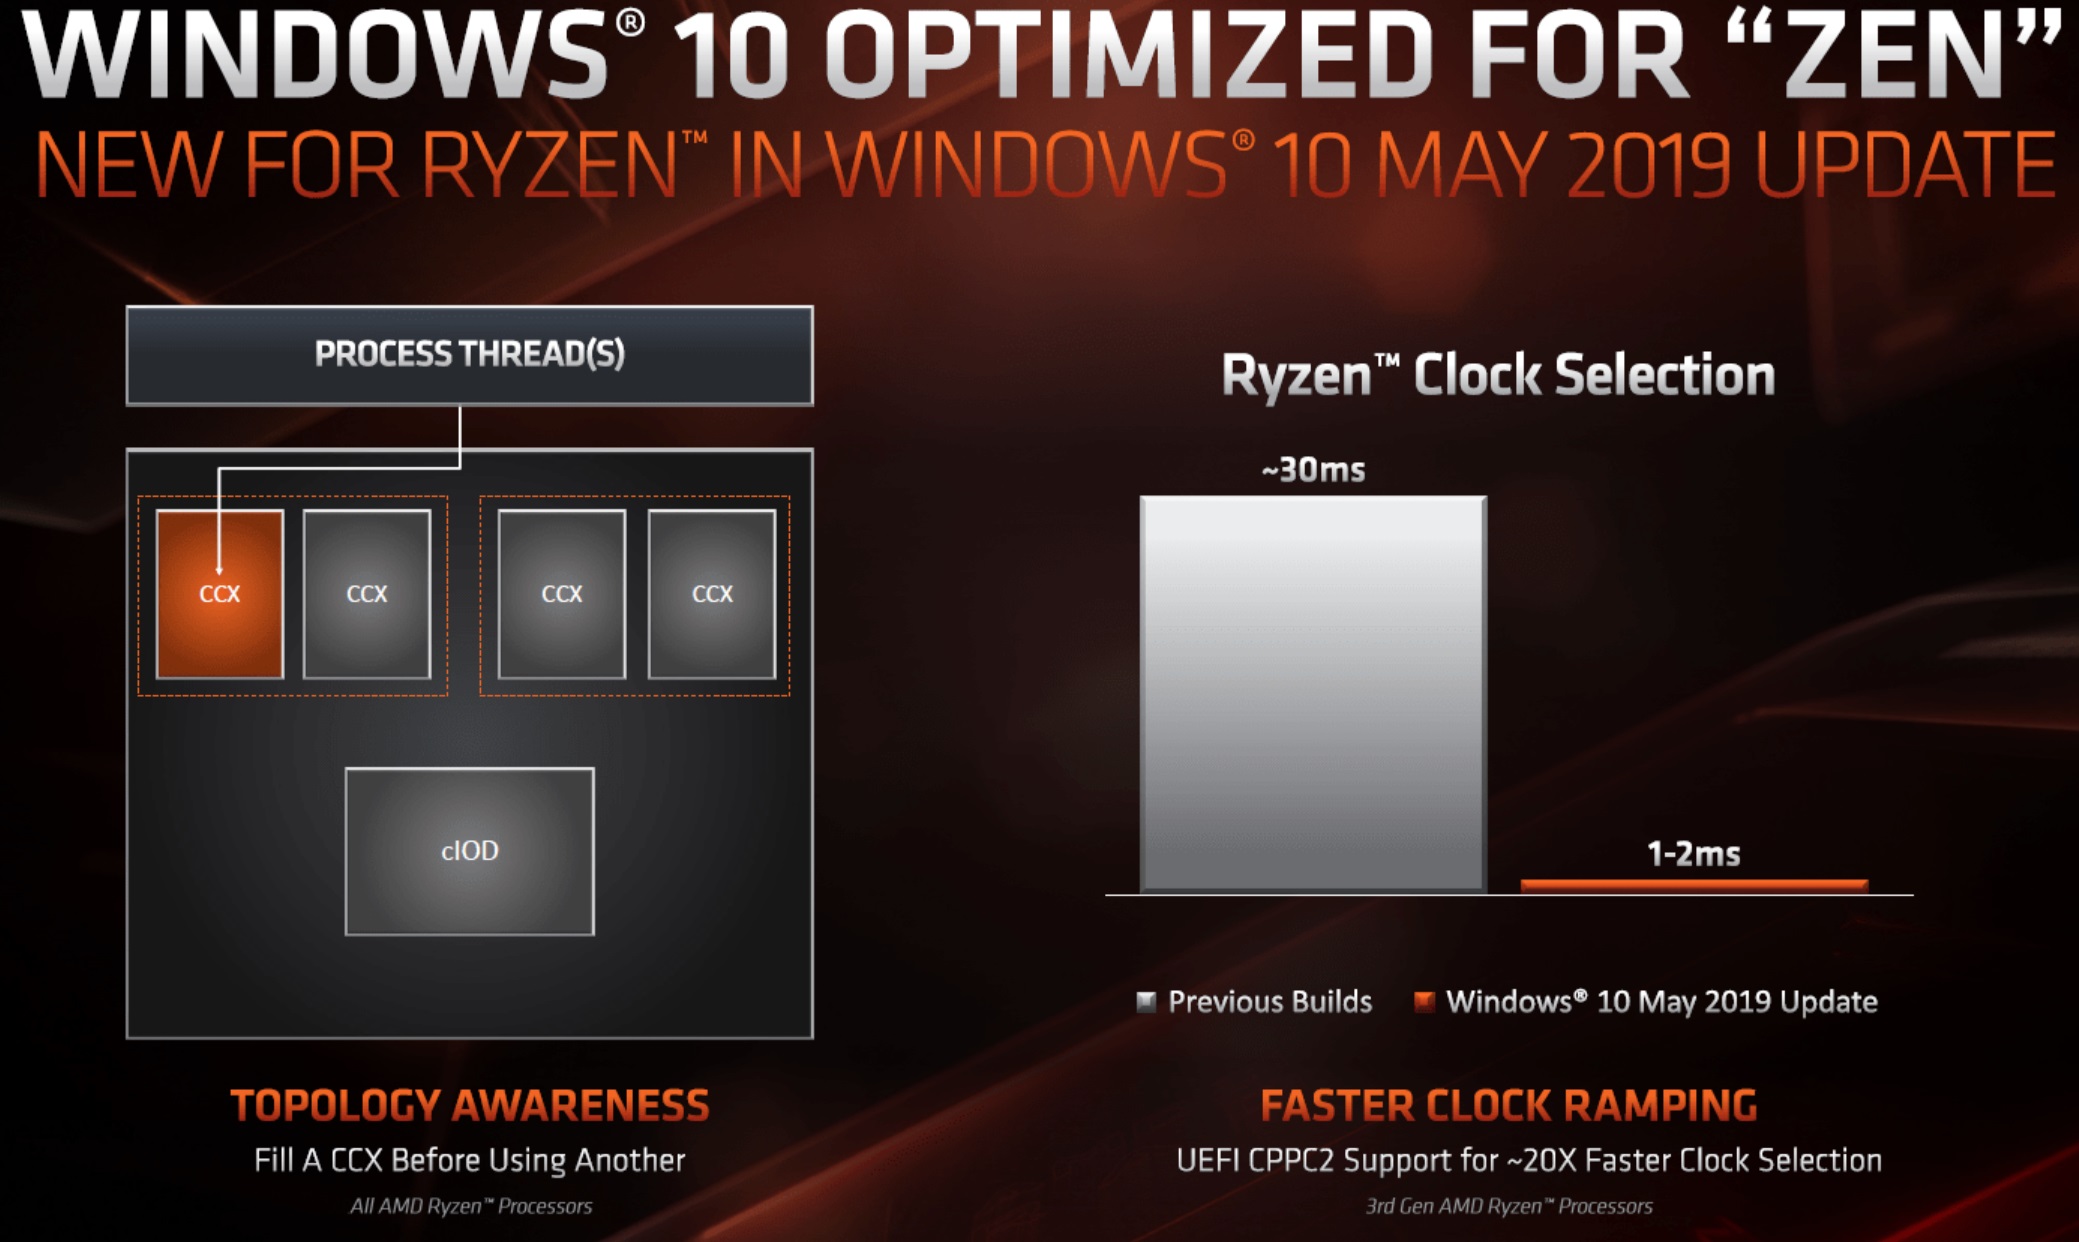 Game Mode Might Boost Performance On AMD Ryzen 9 3900X Processors - Legit Reviews